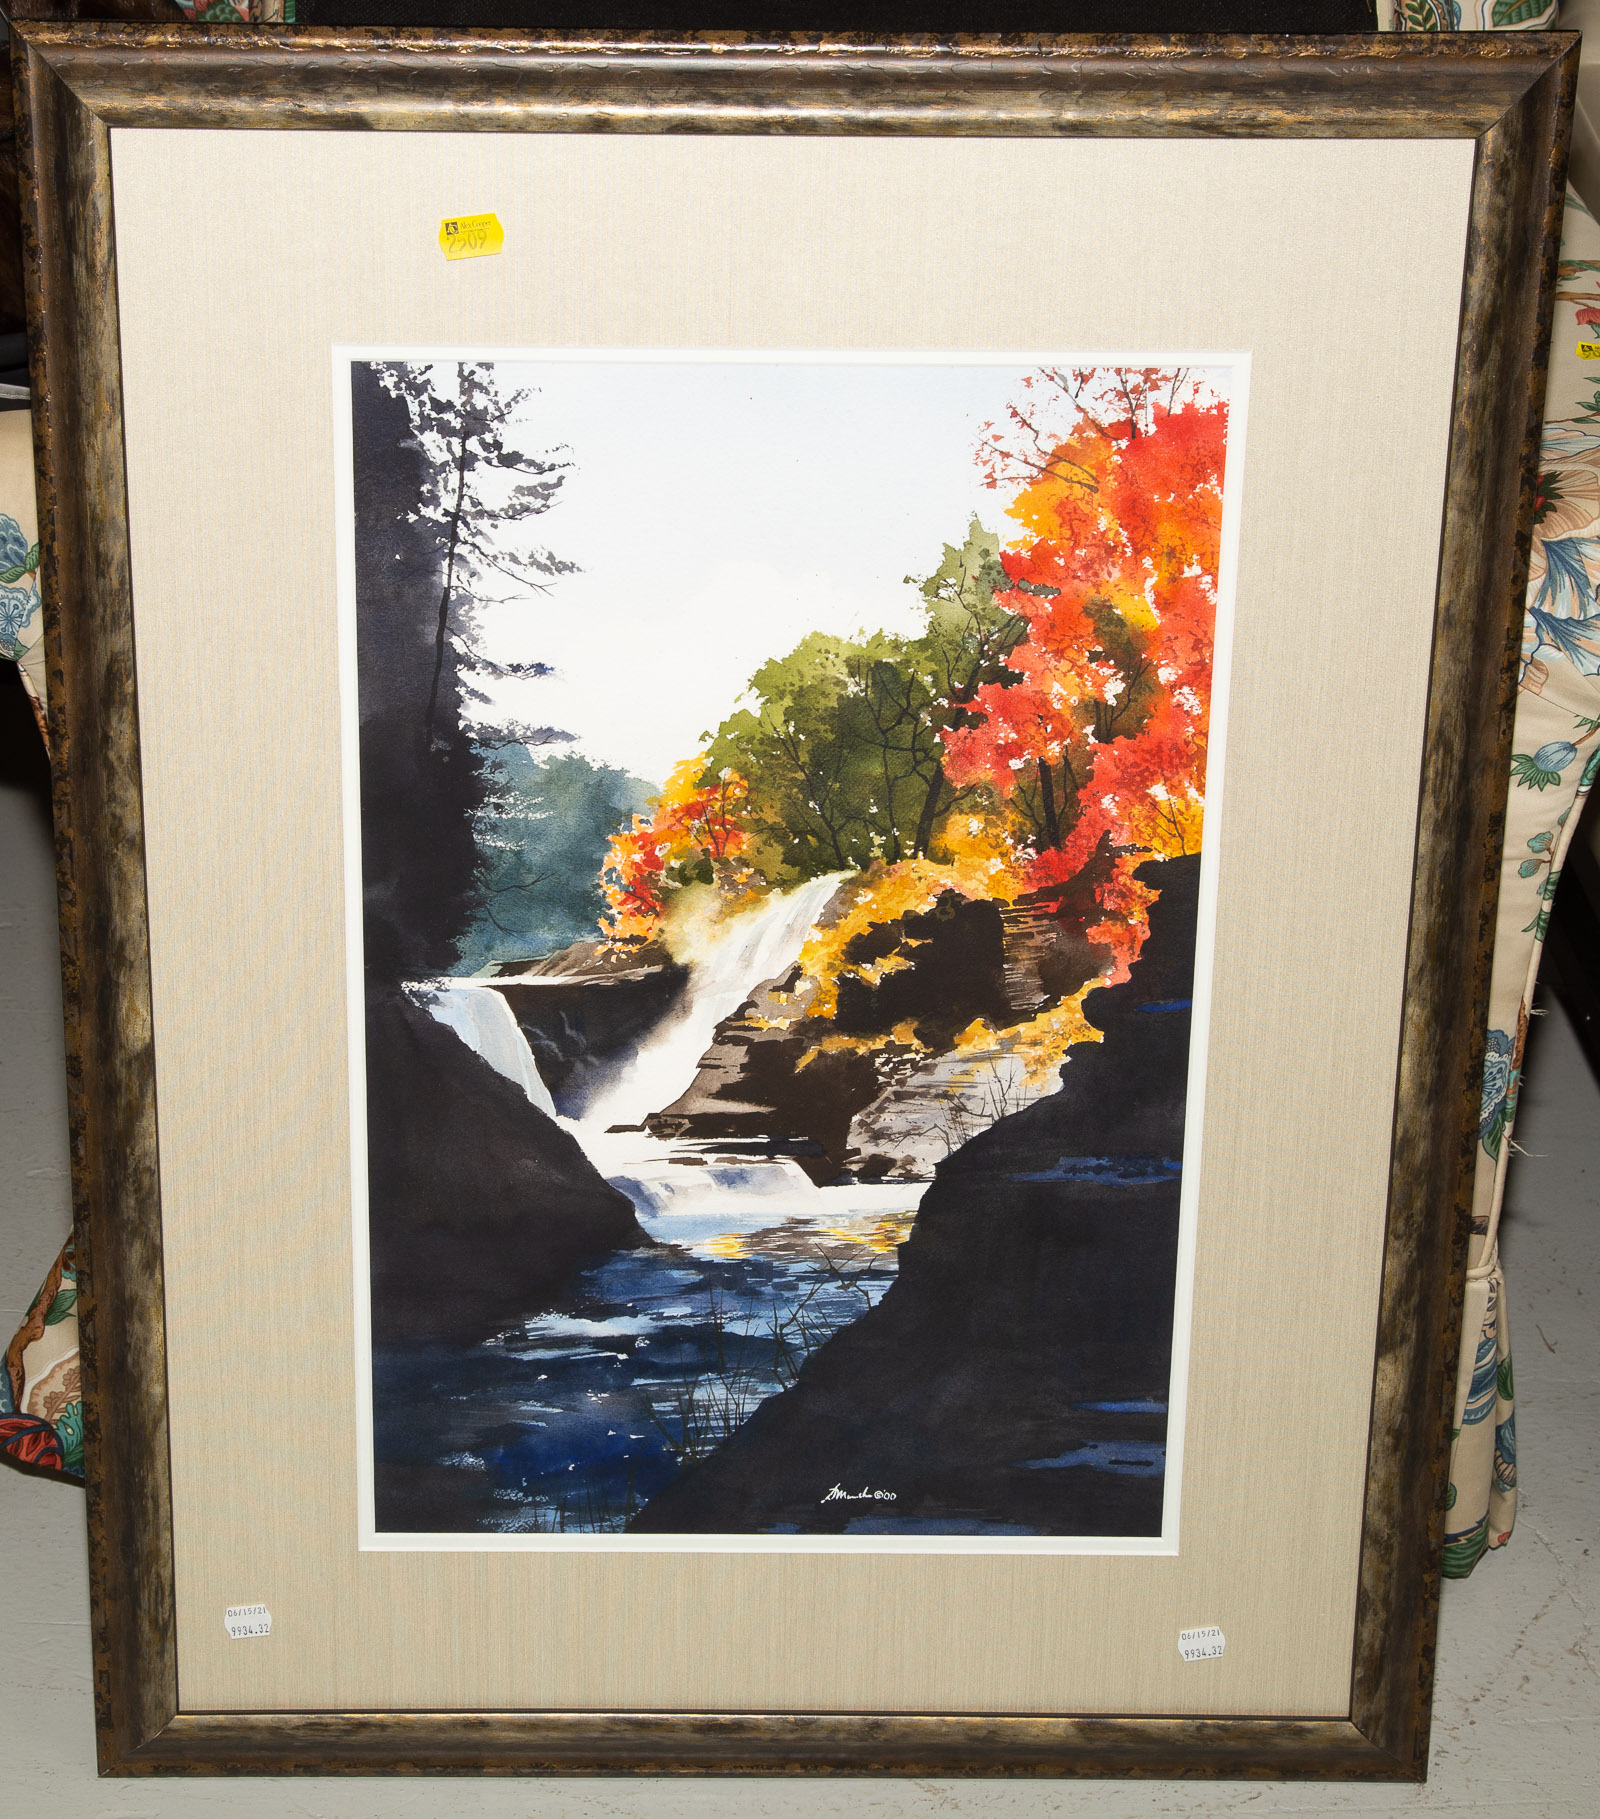 PRINT OF A WATERFALL Framed.